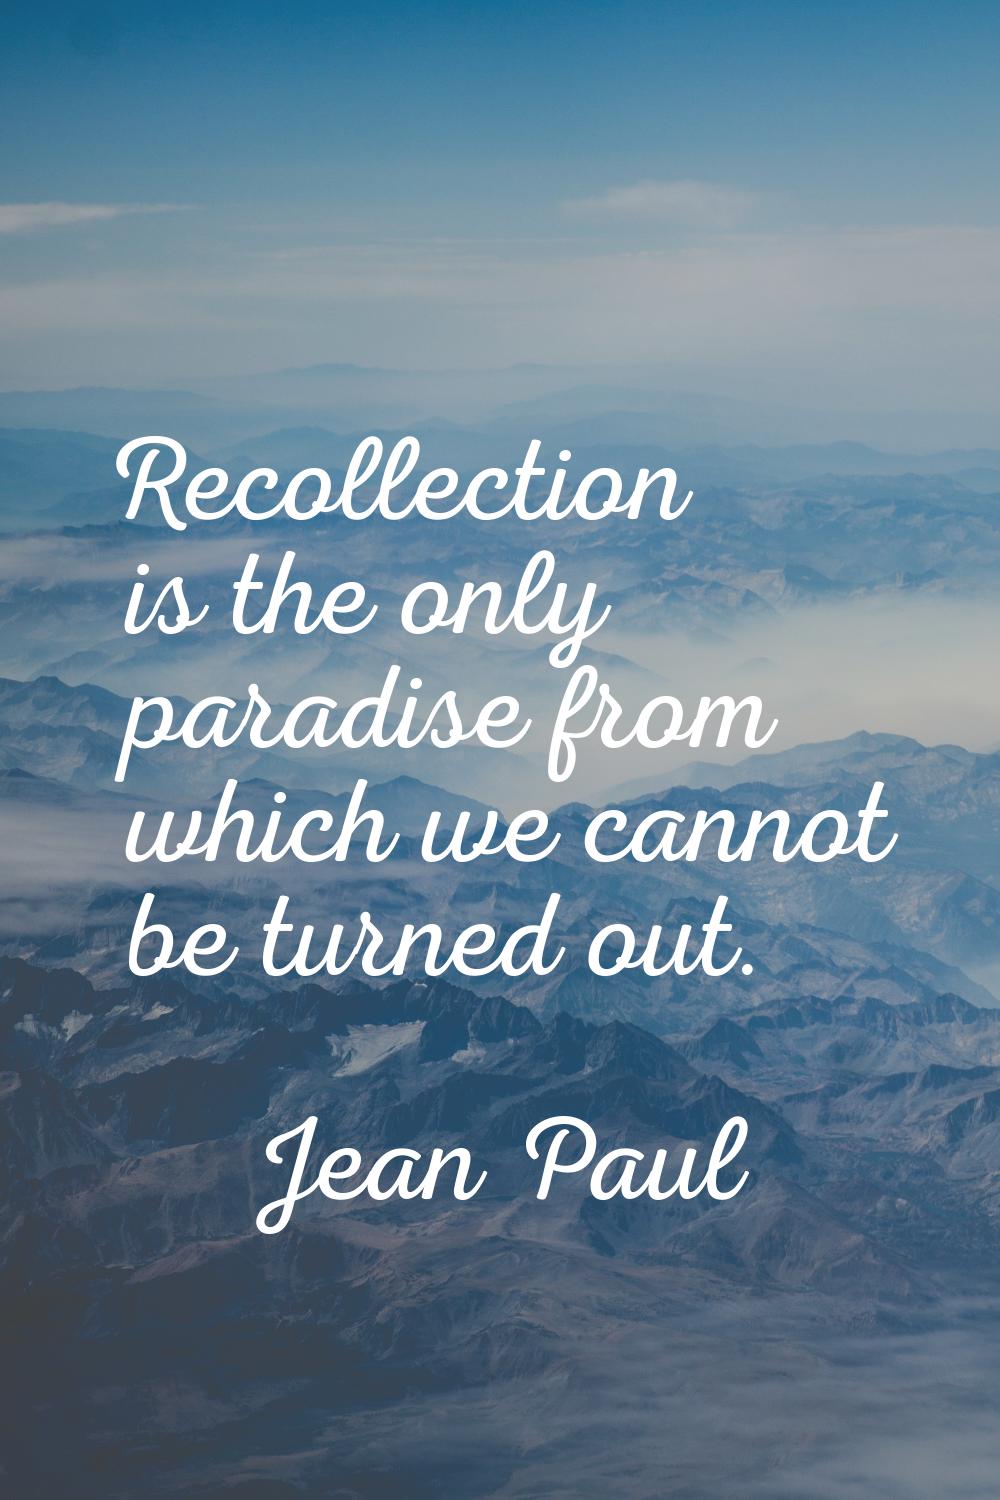 Recollection is the only paradise from which we cannot be turned out.